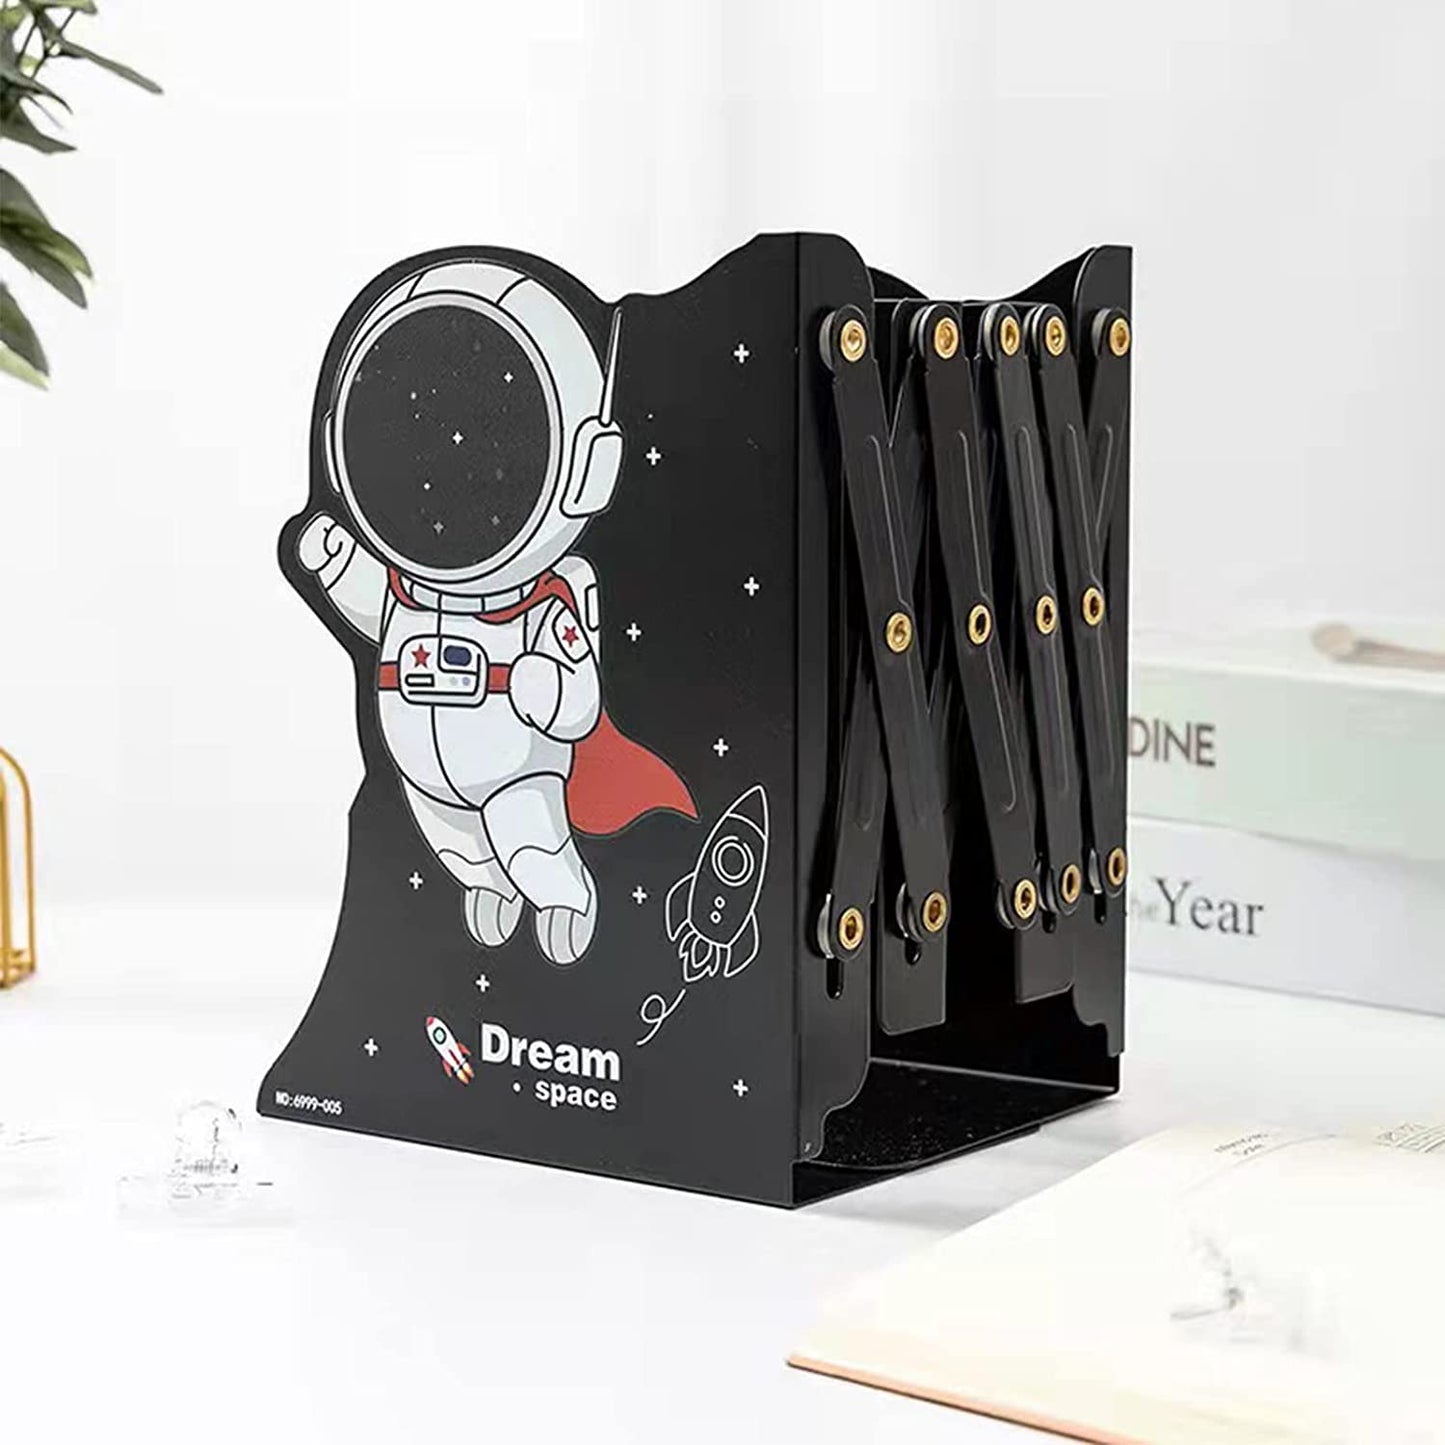 Adjustable Metal Bookends Heavy Duty for Shelves, 2 Dividers, Anti-Slip Design, Astronaut Style Expandable Bookends for Kids, Boys, Desk, Office, Home(19 inches Max)